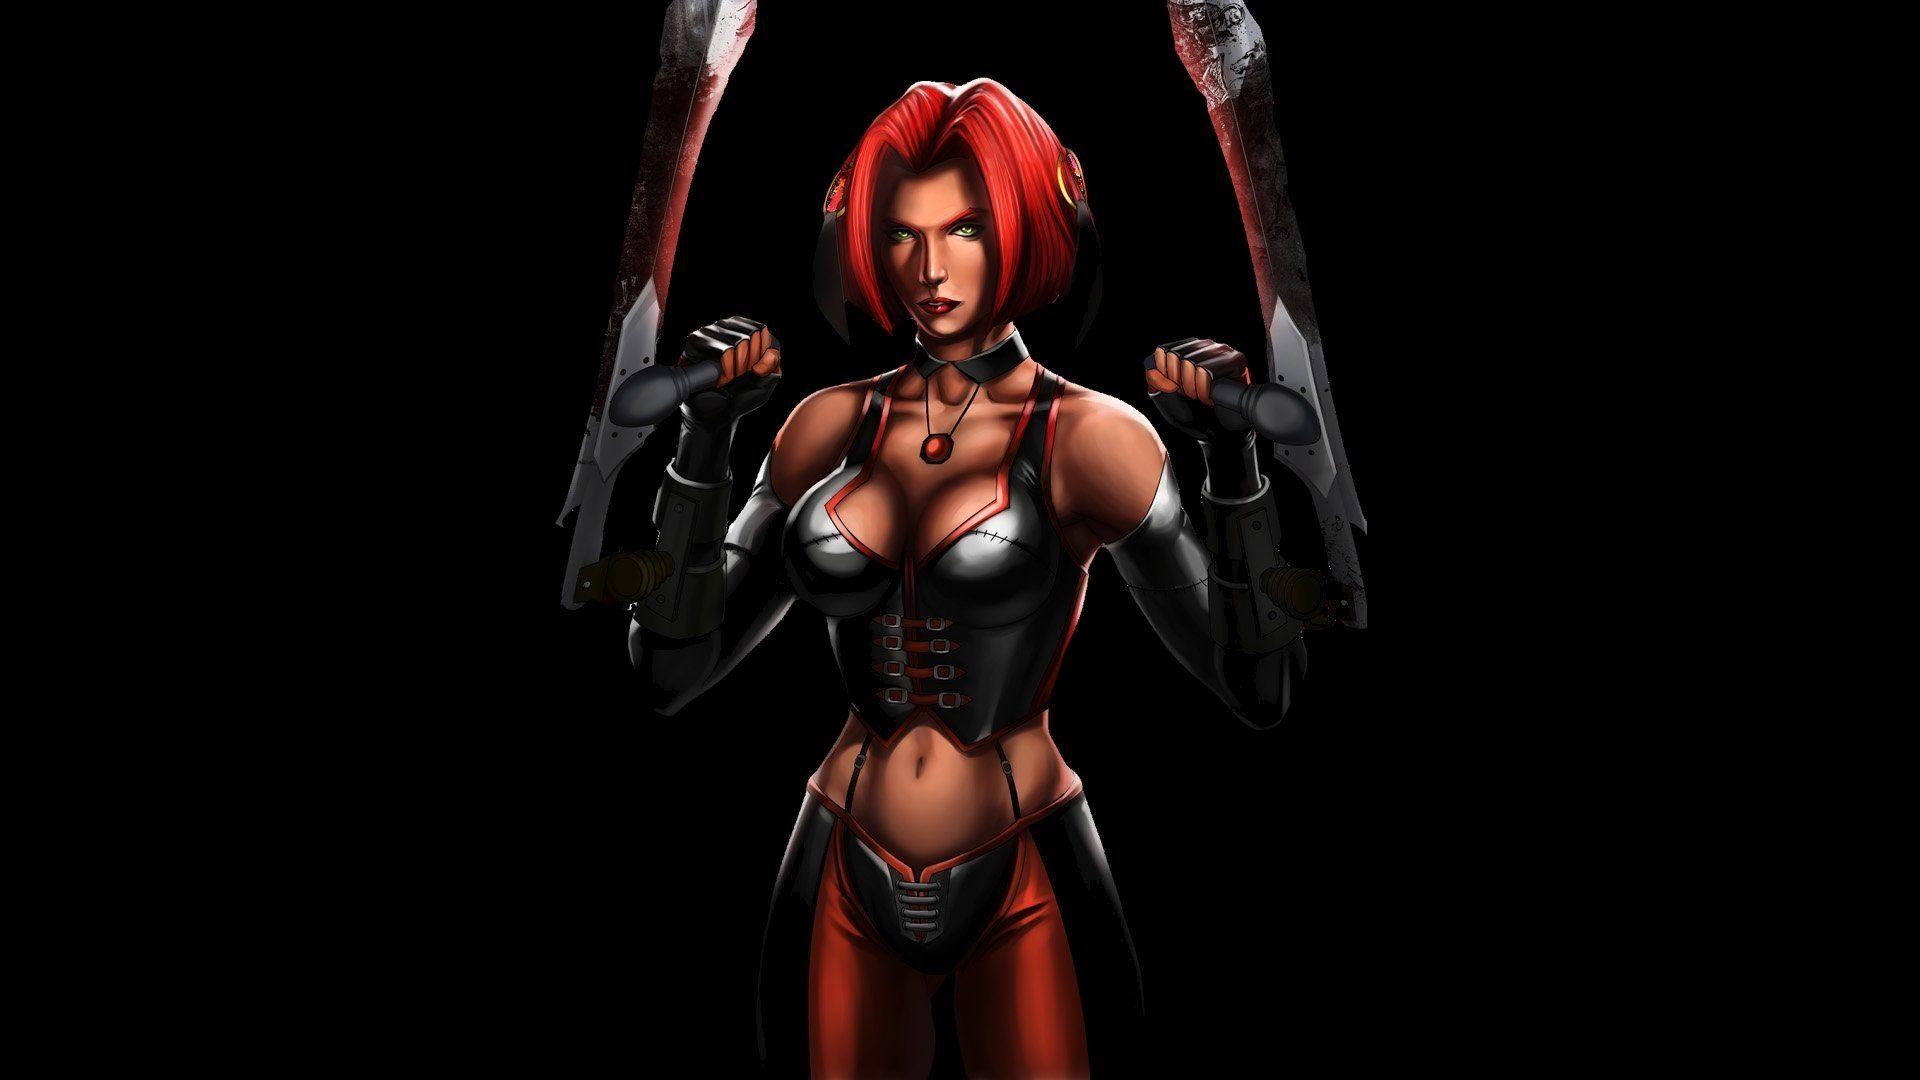 Bloodrayne wallpaper by rodimusg  Download on ZEDGE  ec8e